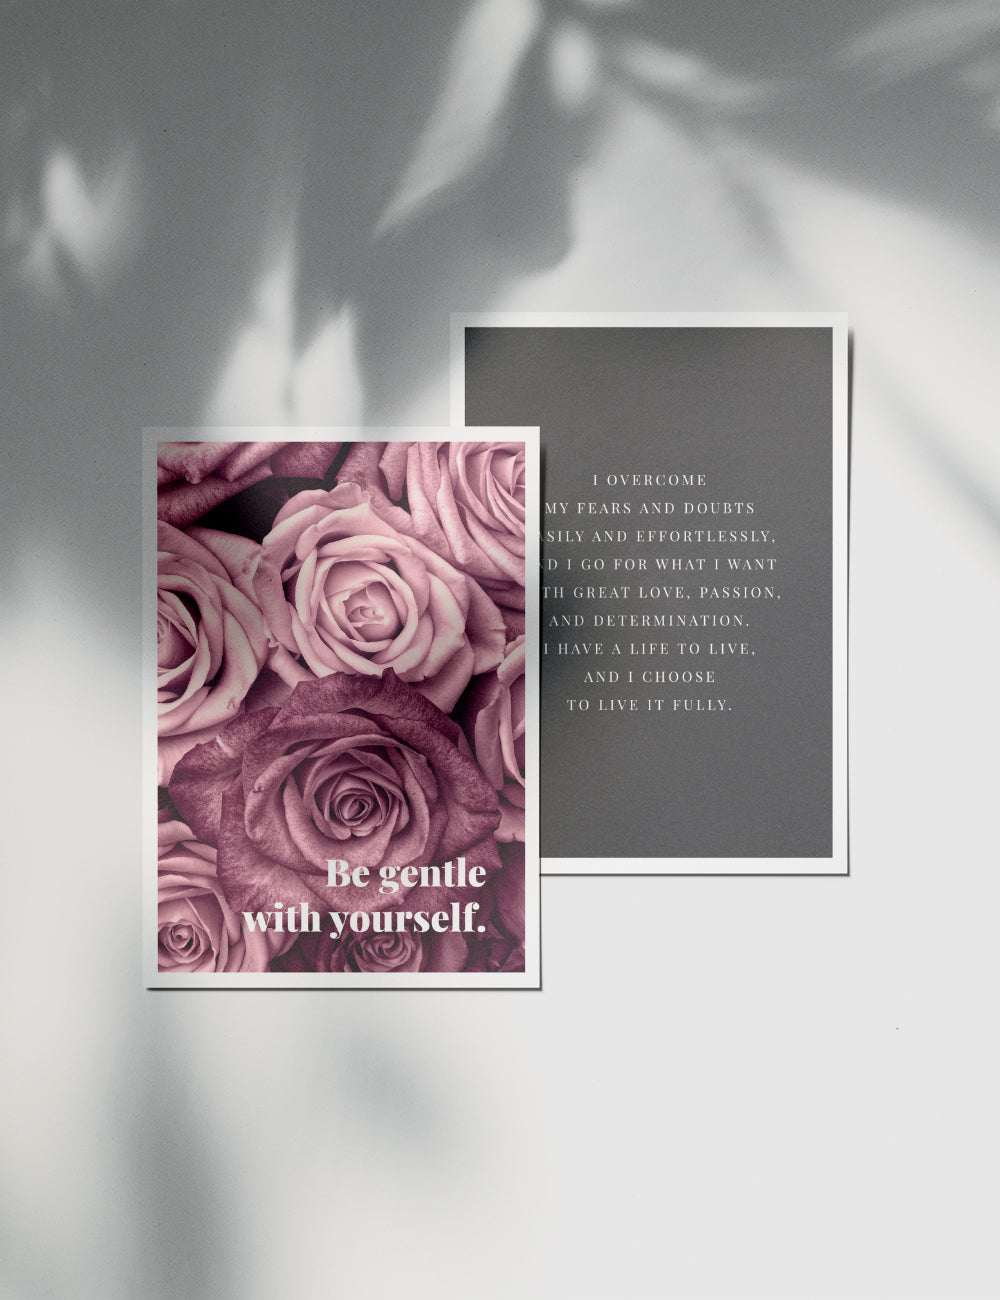 Printable Vision Board Kit 03: Affirmation Cards and Inspirational